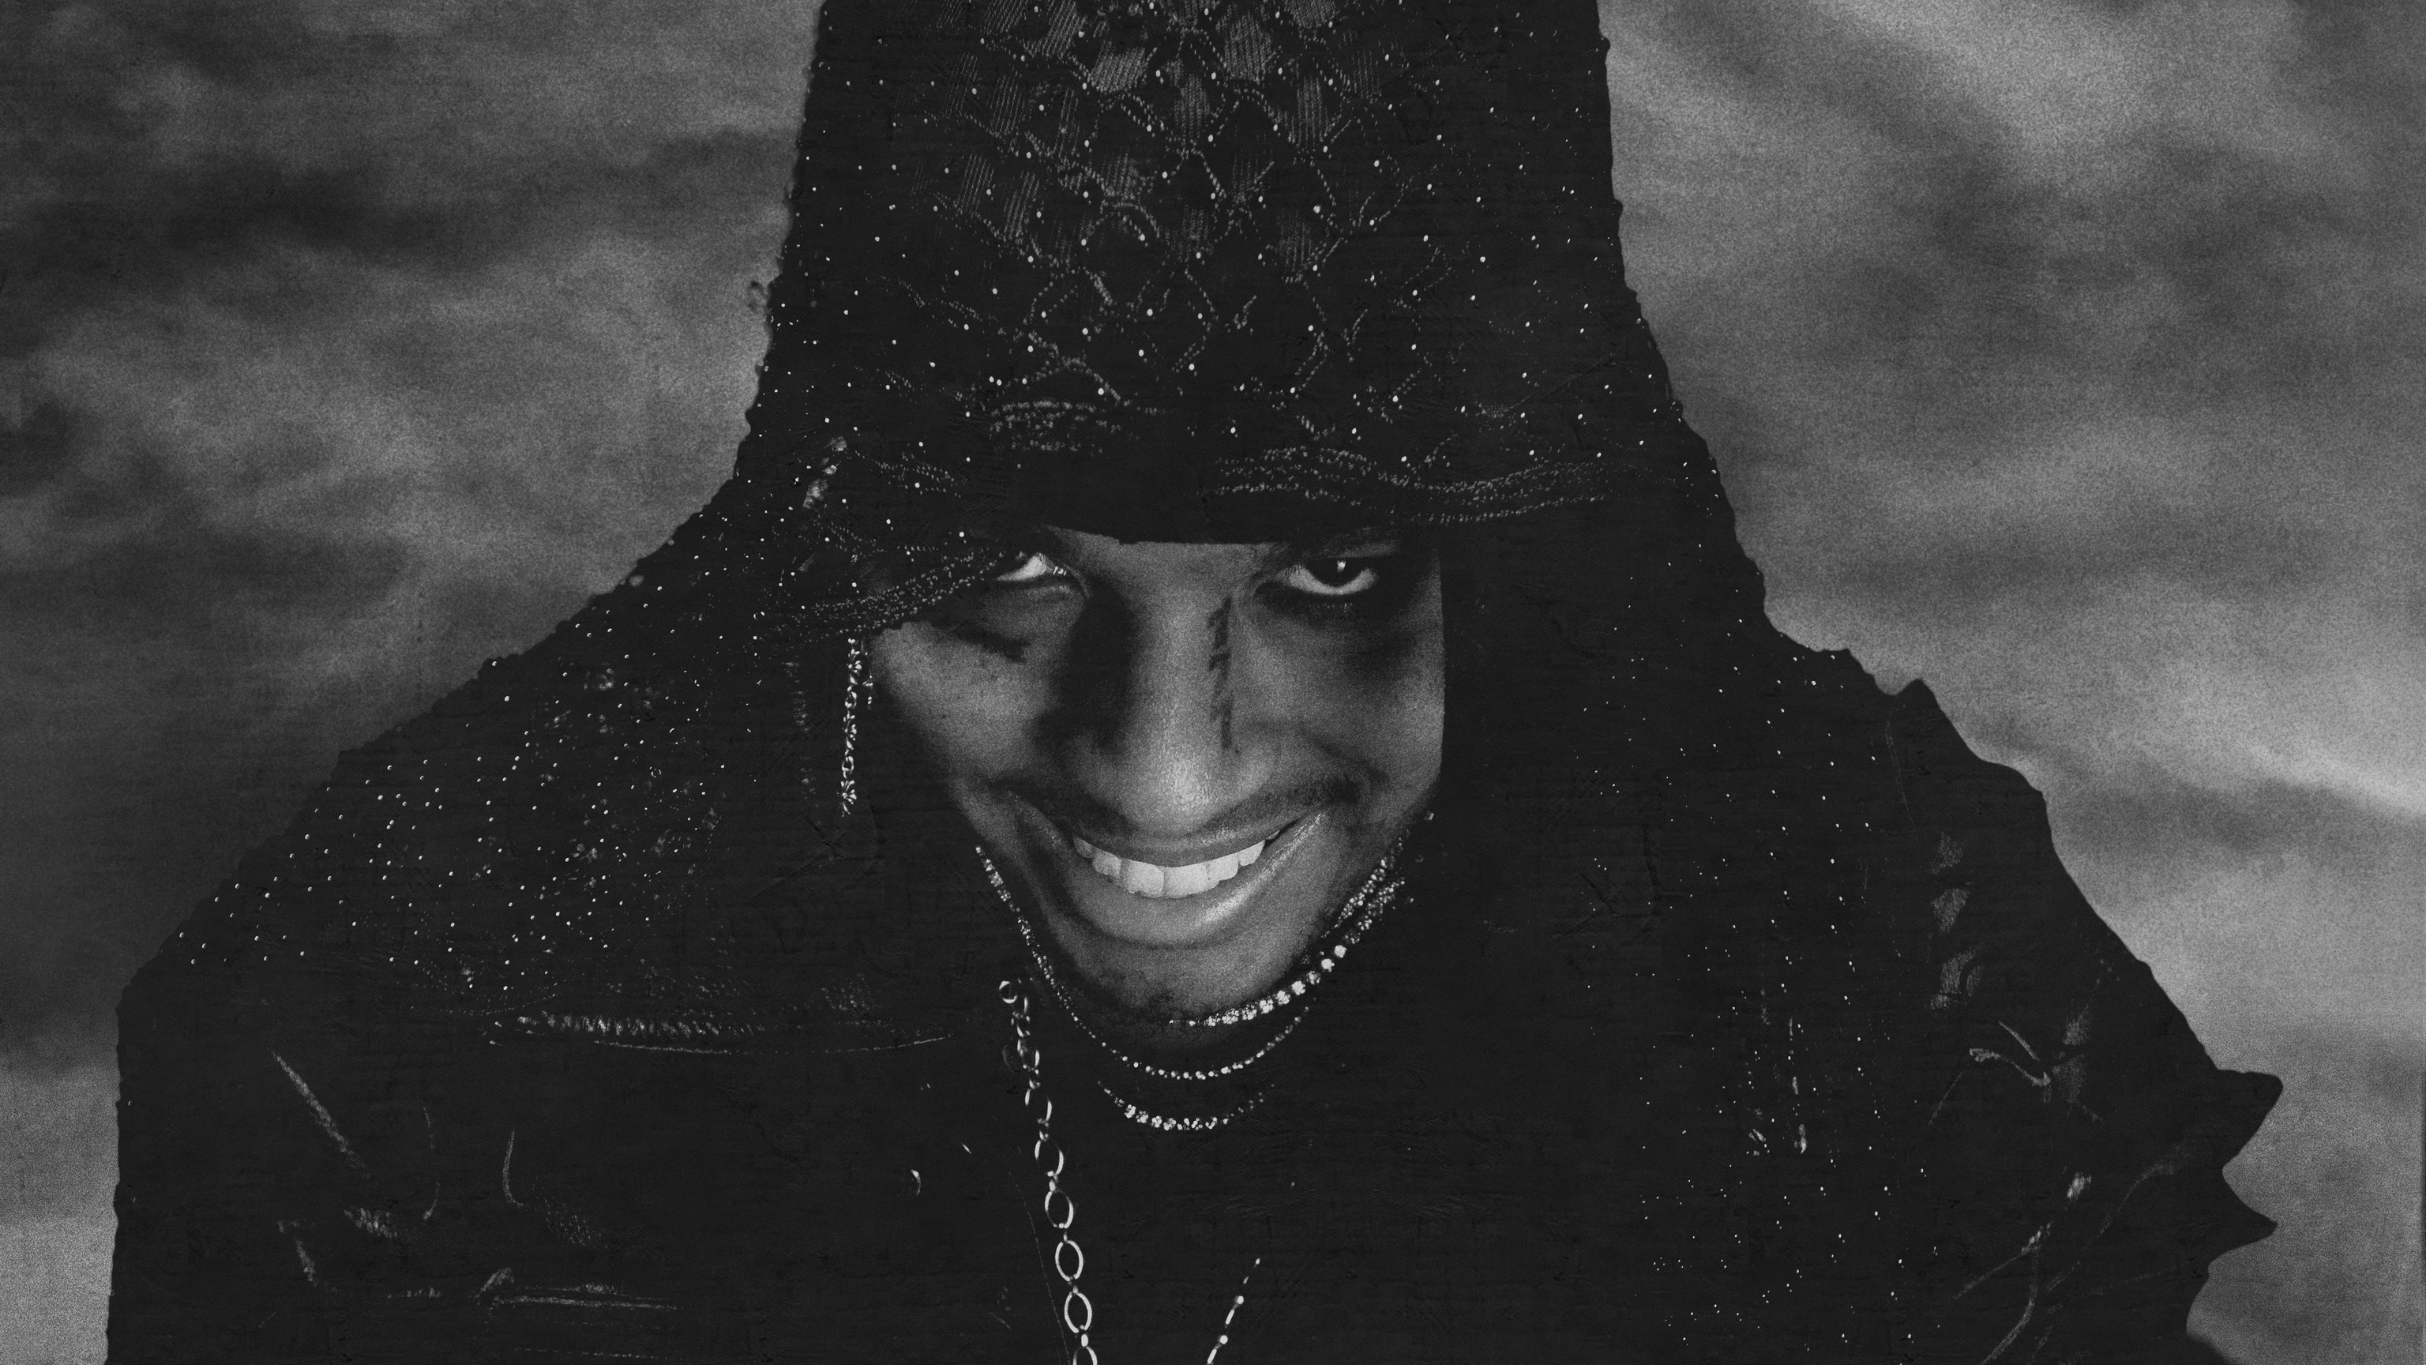 working presale password to Ski Mask The Slump God - 11th Dimension Tour tickets in San Francisco at The Midway